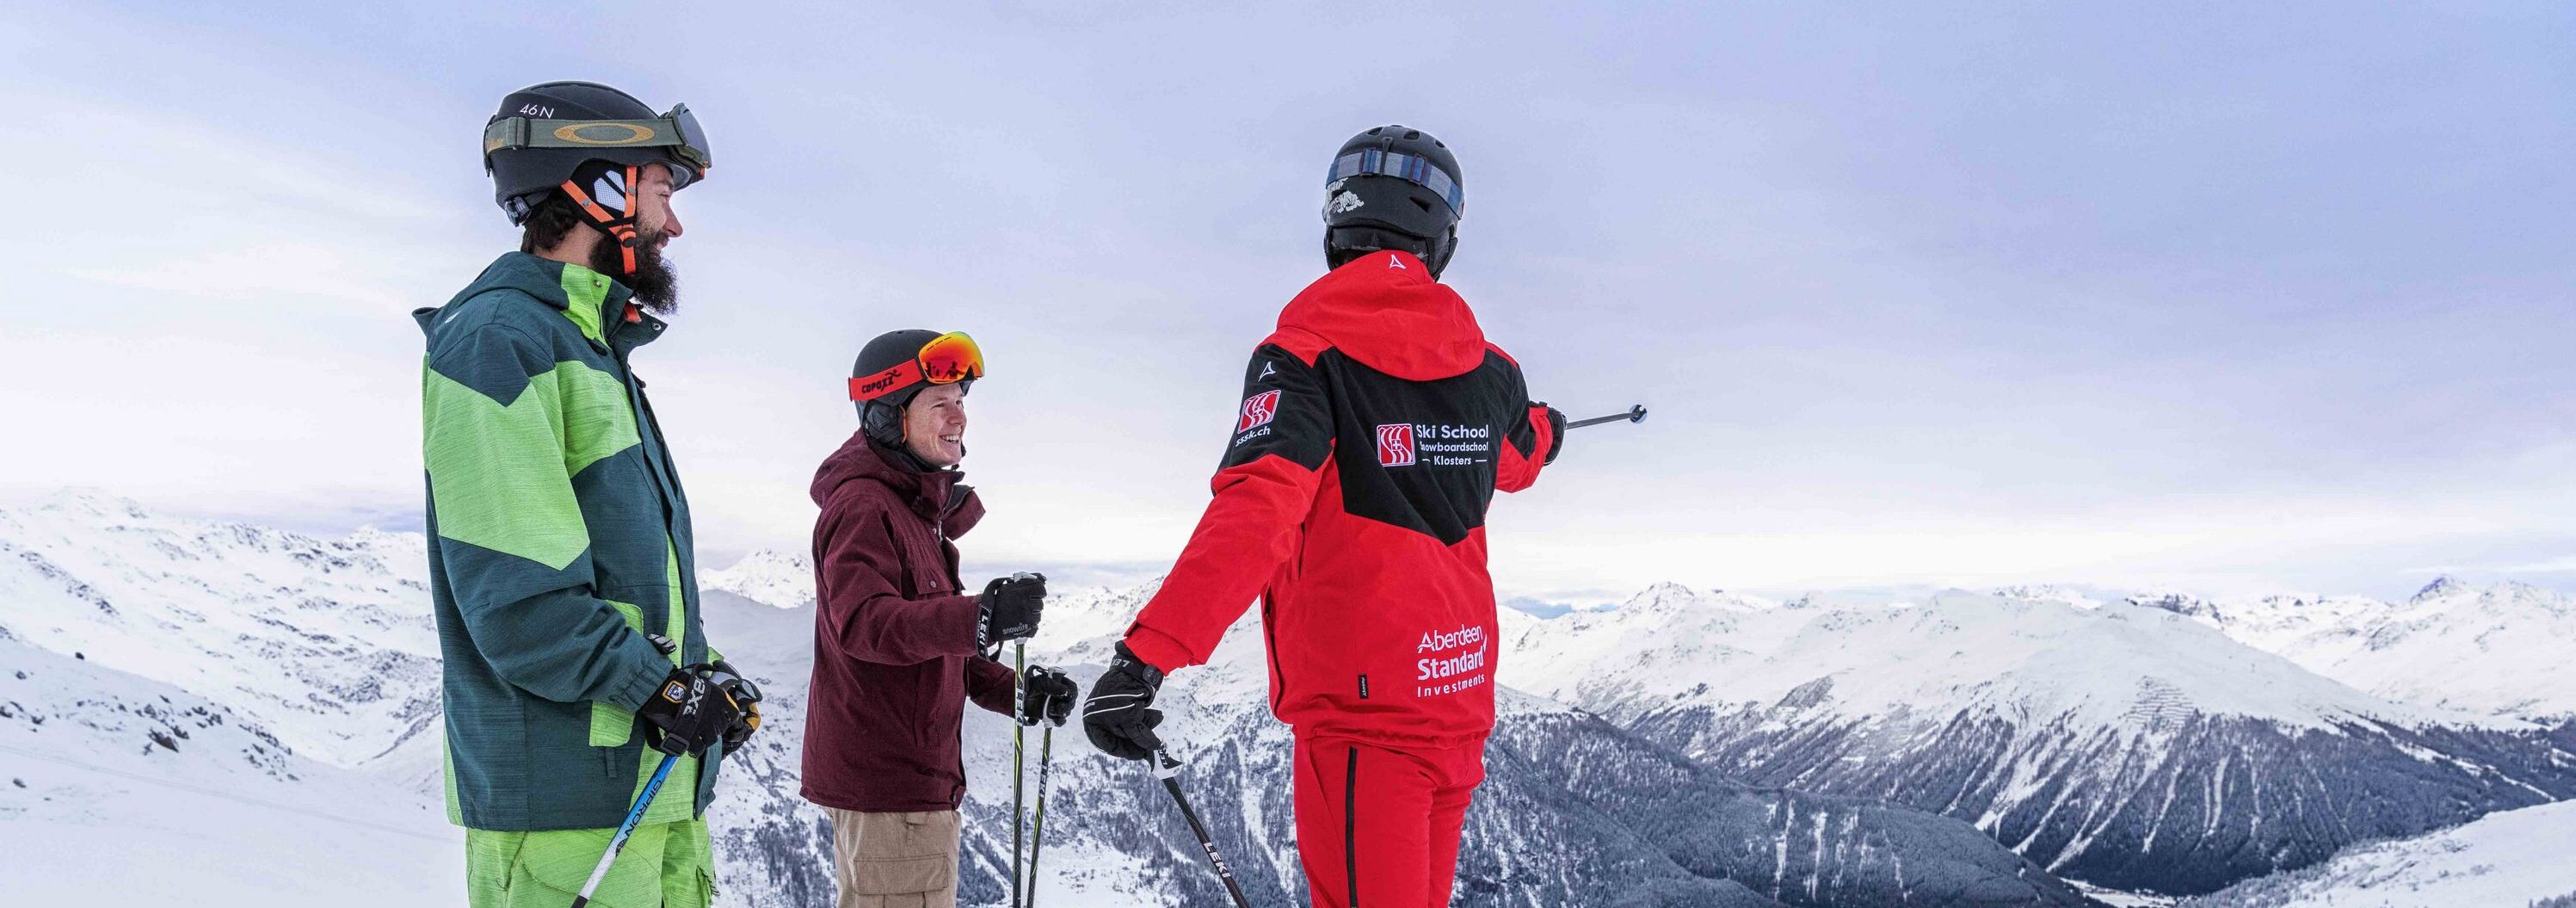 Ski course for adults with two participants and a ski instructor from the Klosters Ski School